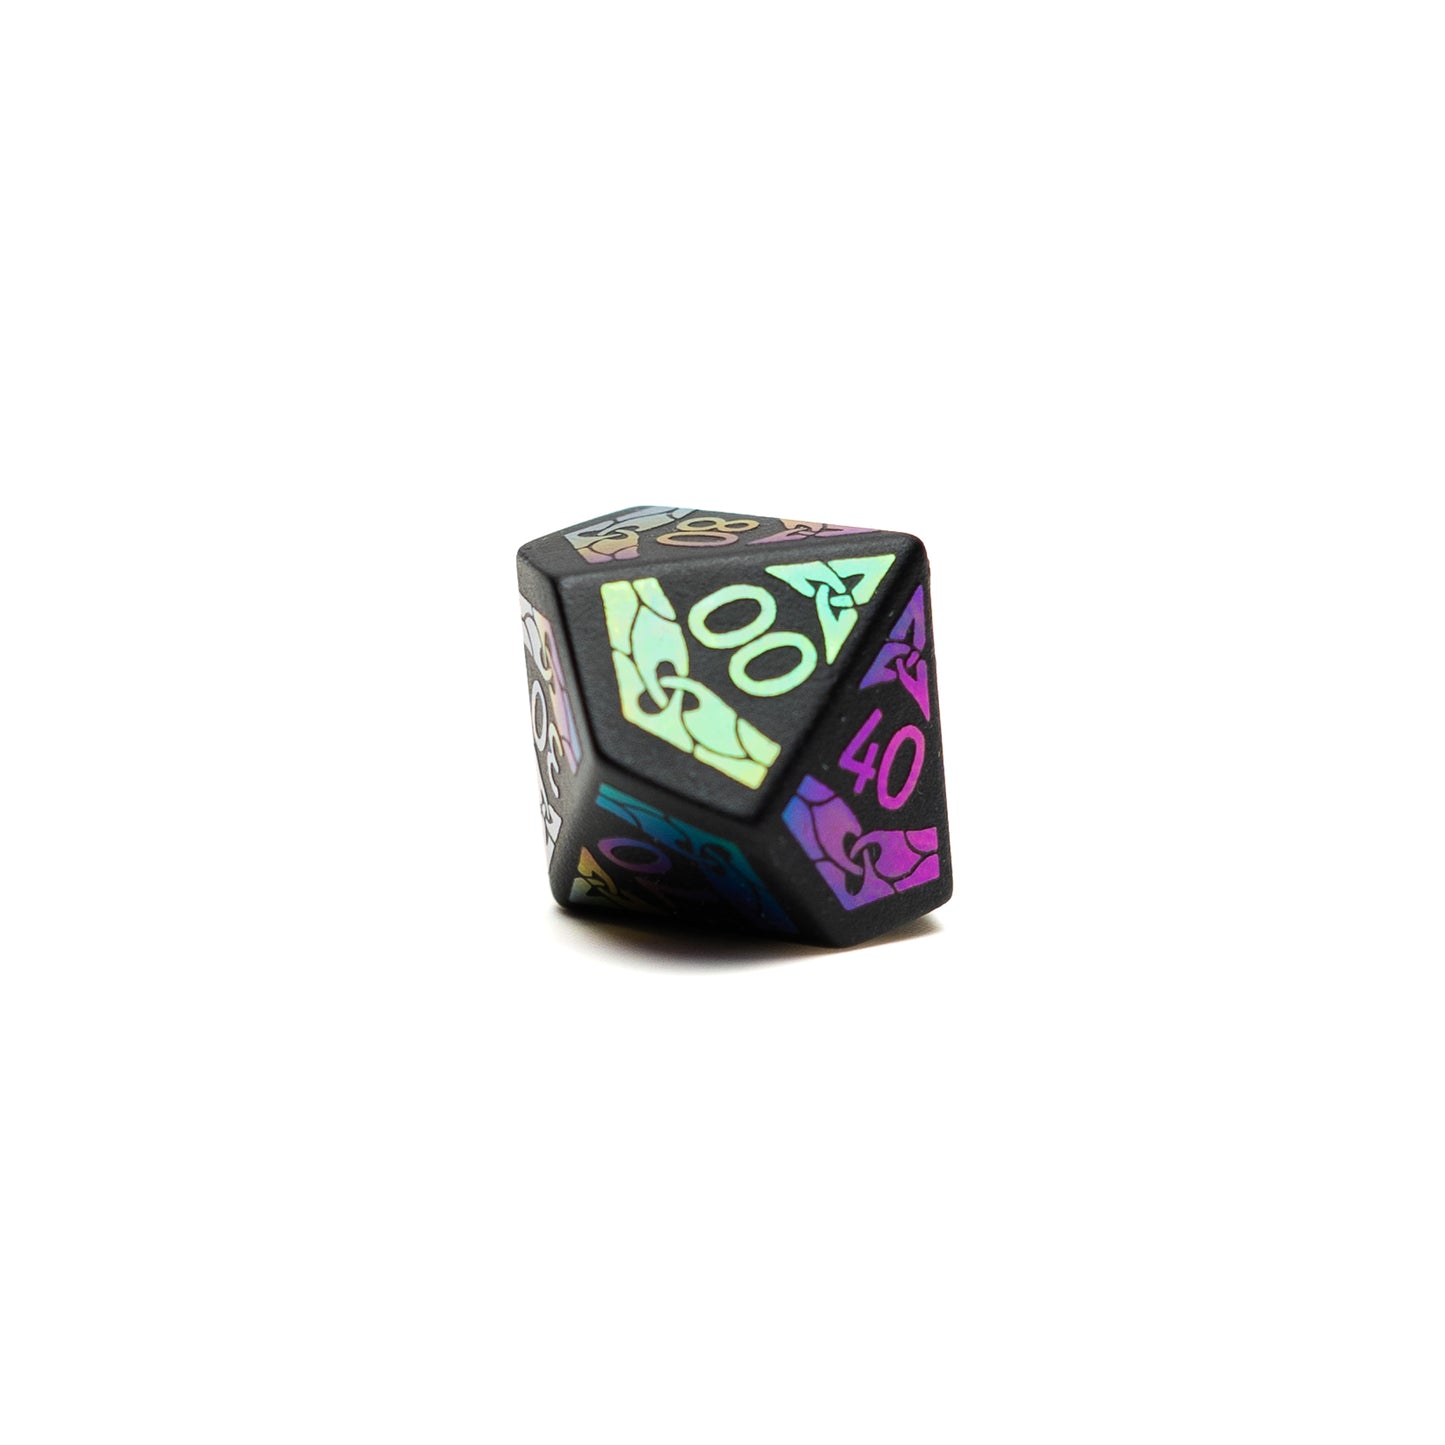 Roll Britannia Sharp Edged Obsidian Gemstone Dungeons and Dragons D10 Percentile Dice with Iridescent details